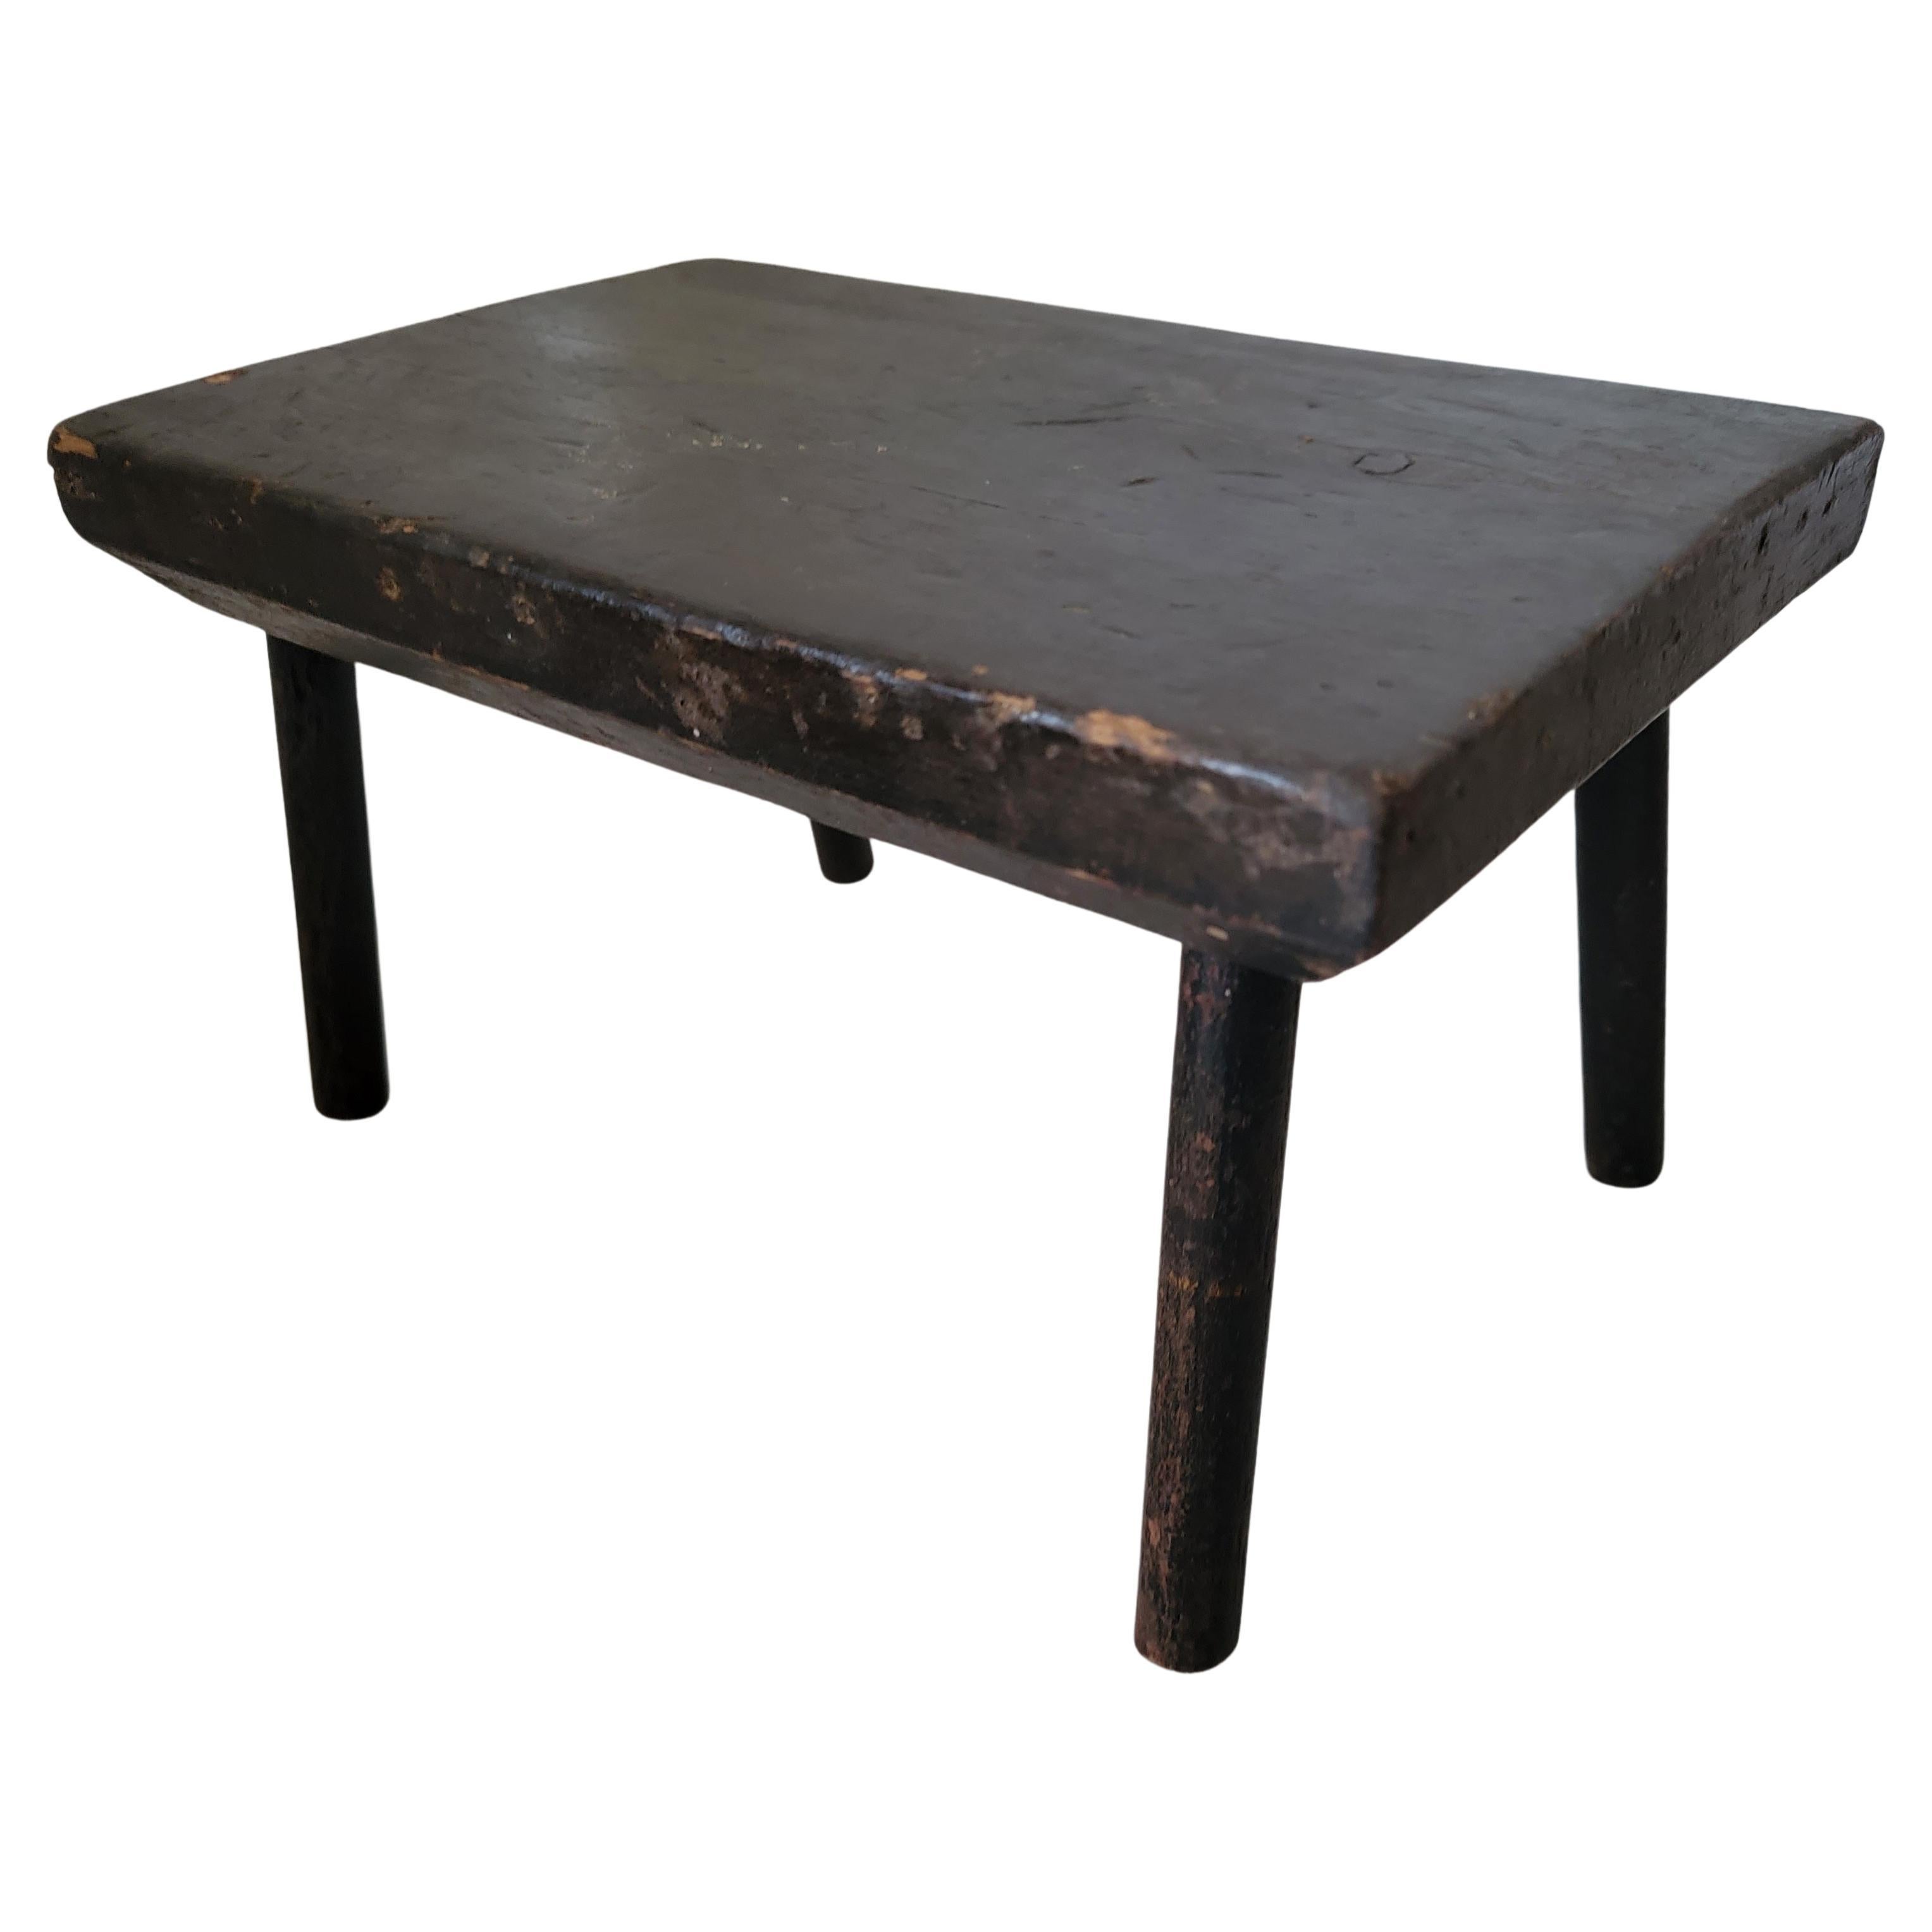 19th C original painted milking stool with pencil post legs.